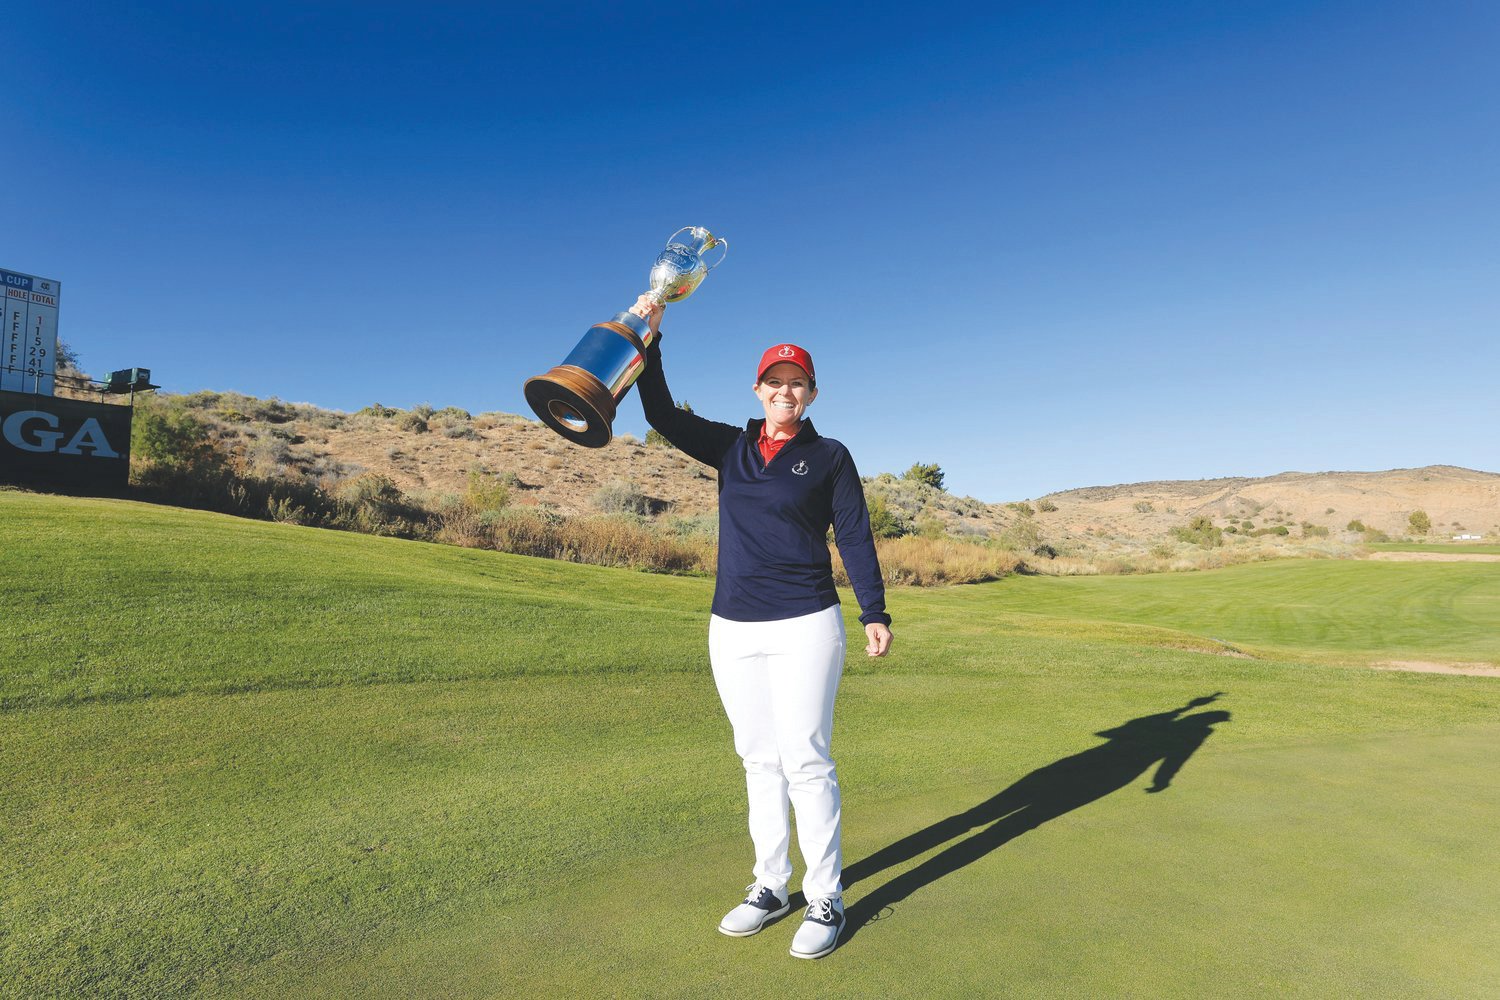 SANTA ANA PUEBLO, NM - OCTOBER 29: Stephanie Connelly-Eiswerth of Team USA poses for a photo with the Women's PGA Cup during the final round of the 2nd Women's PGA Cup at Twin Warriors Golf Club on Saturday, October 29, 2022 in Santa Ana Pueblo, New Mexico. (Photo by Sam Greenwood/PGA of America)